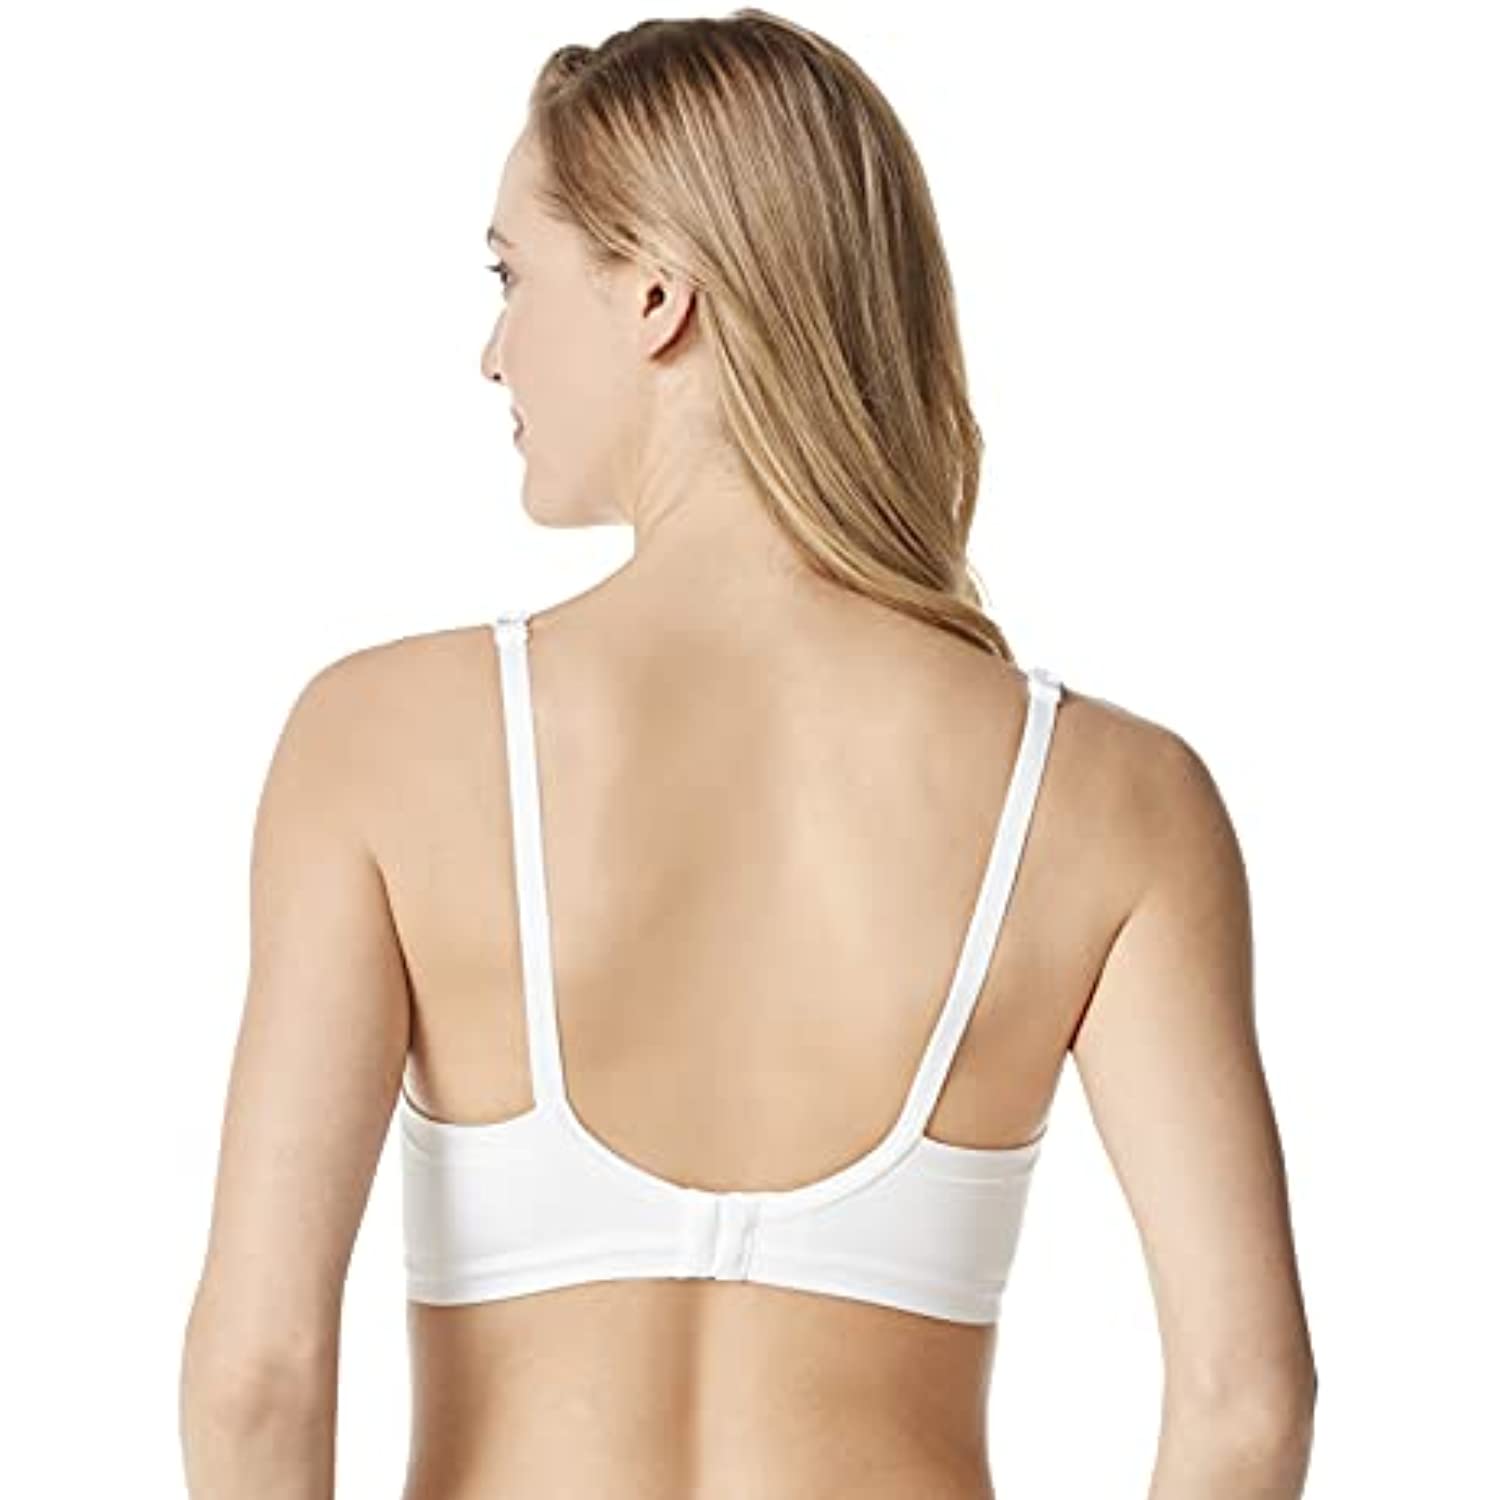 Warner's Women's Easy Does It Wire-free Convertible Bra - Rm0911a